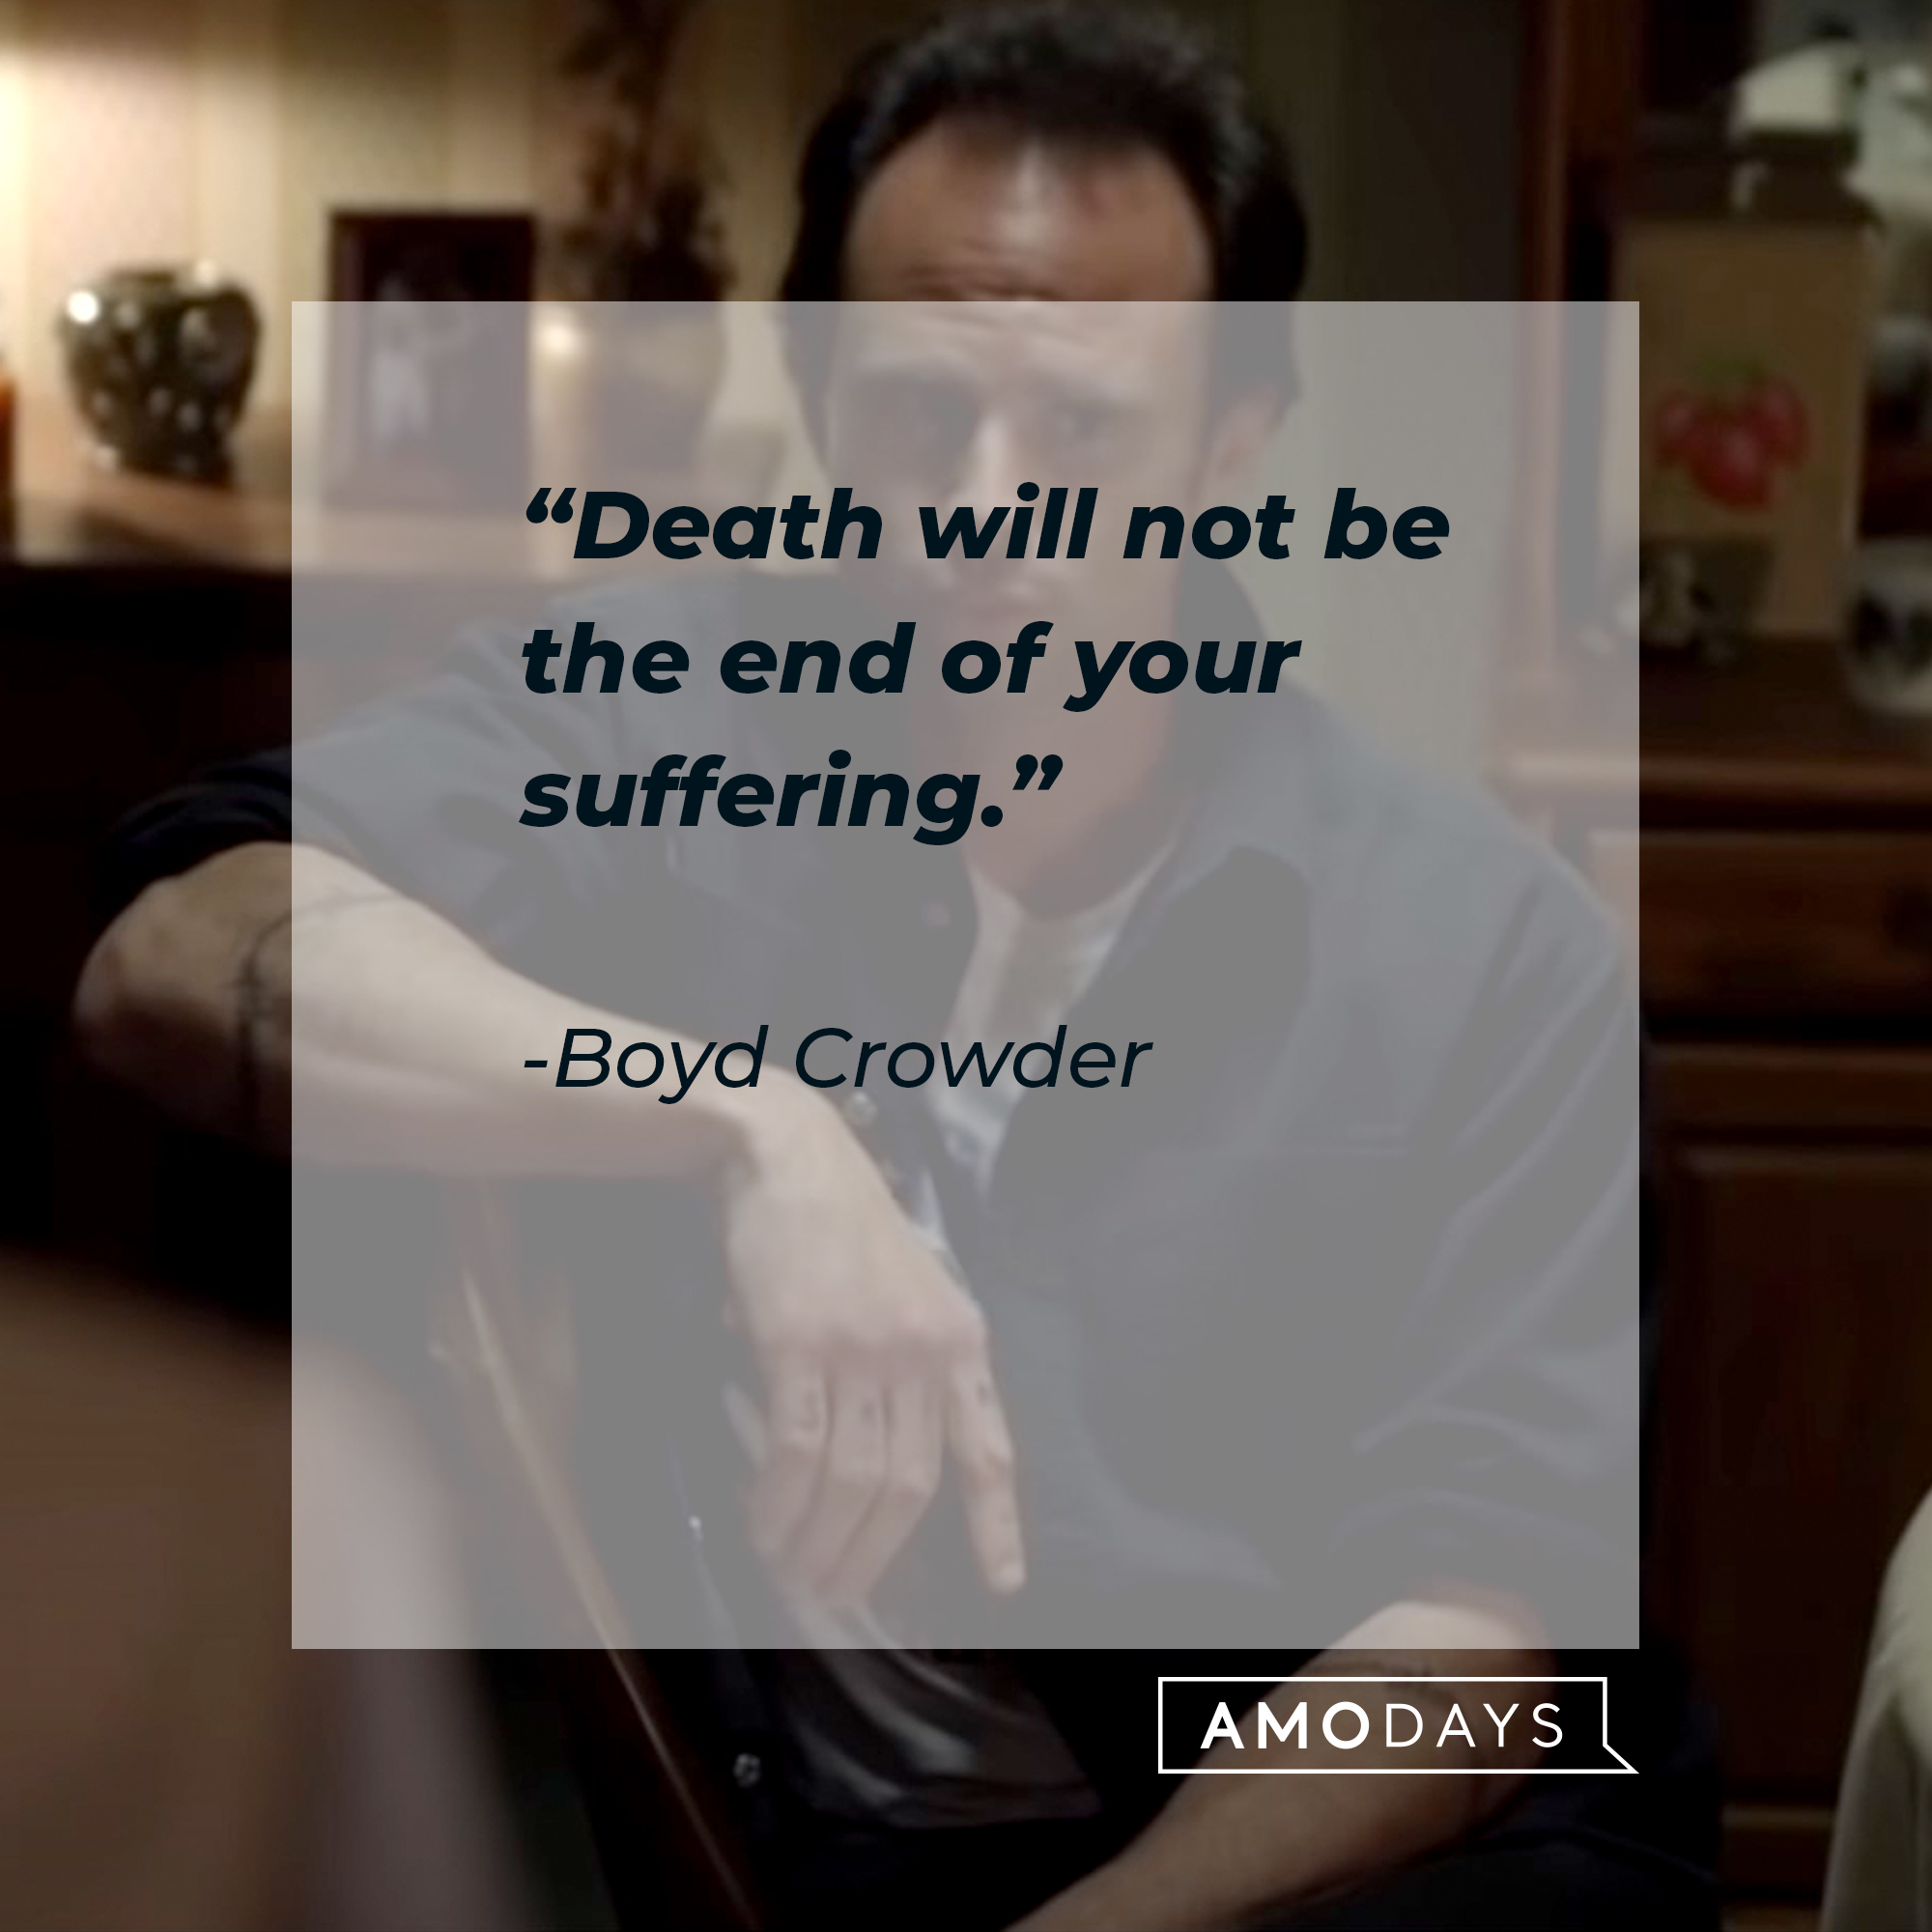 An image of  Boyd Crowder with his quote: “Death will not be the end of your suffering.” | Source:  youtube.com/FXNetworks